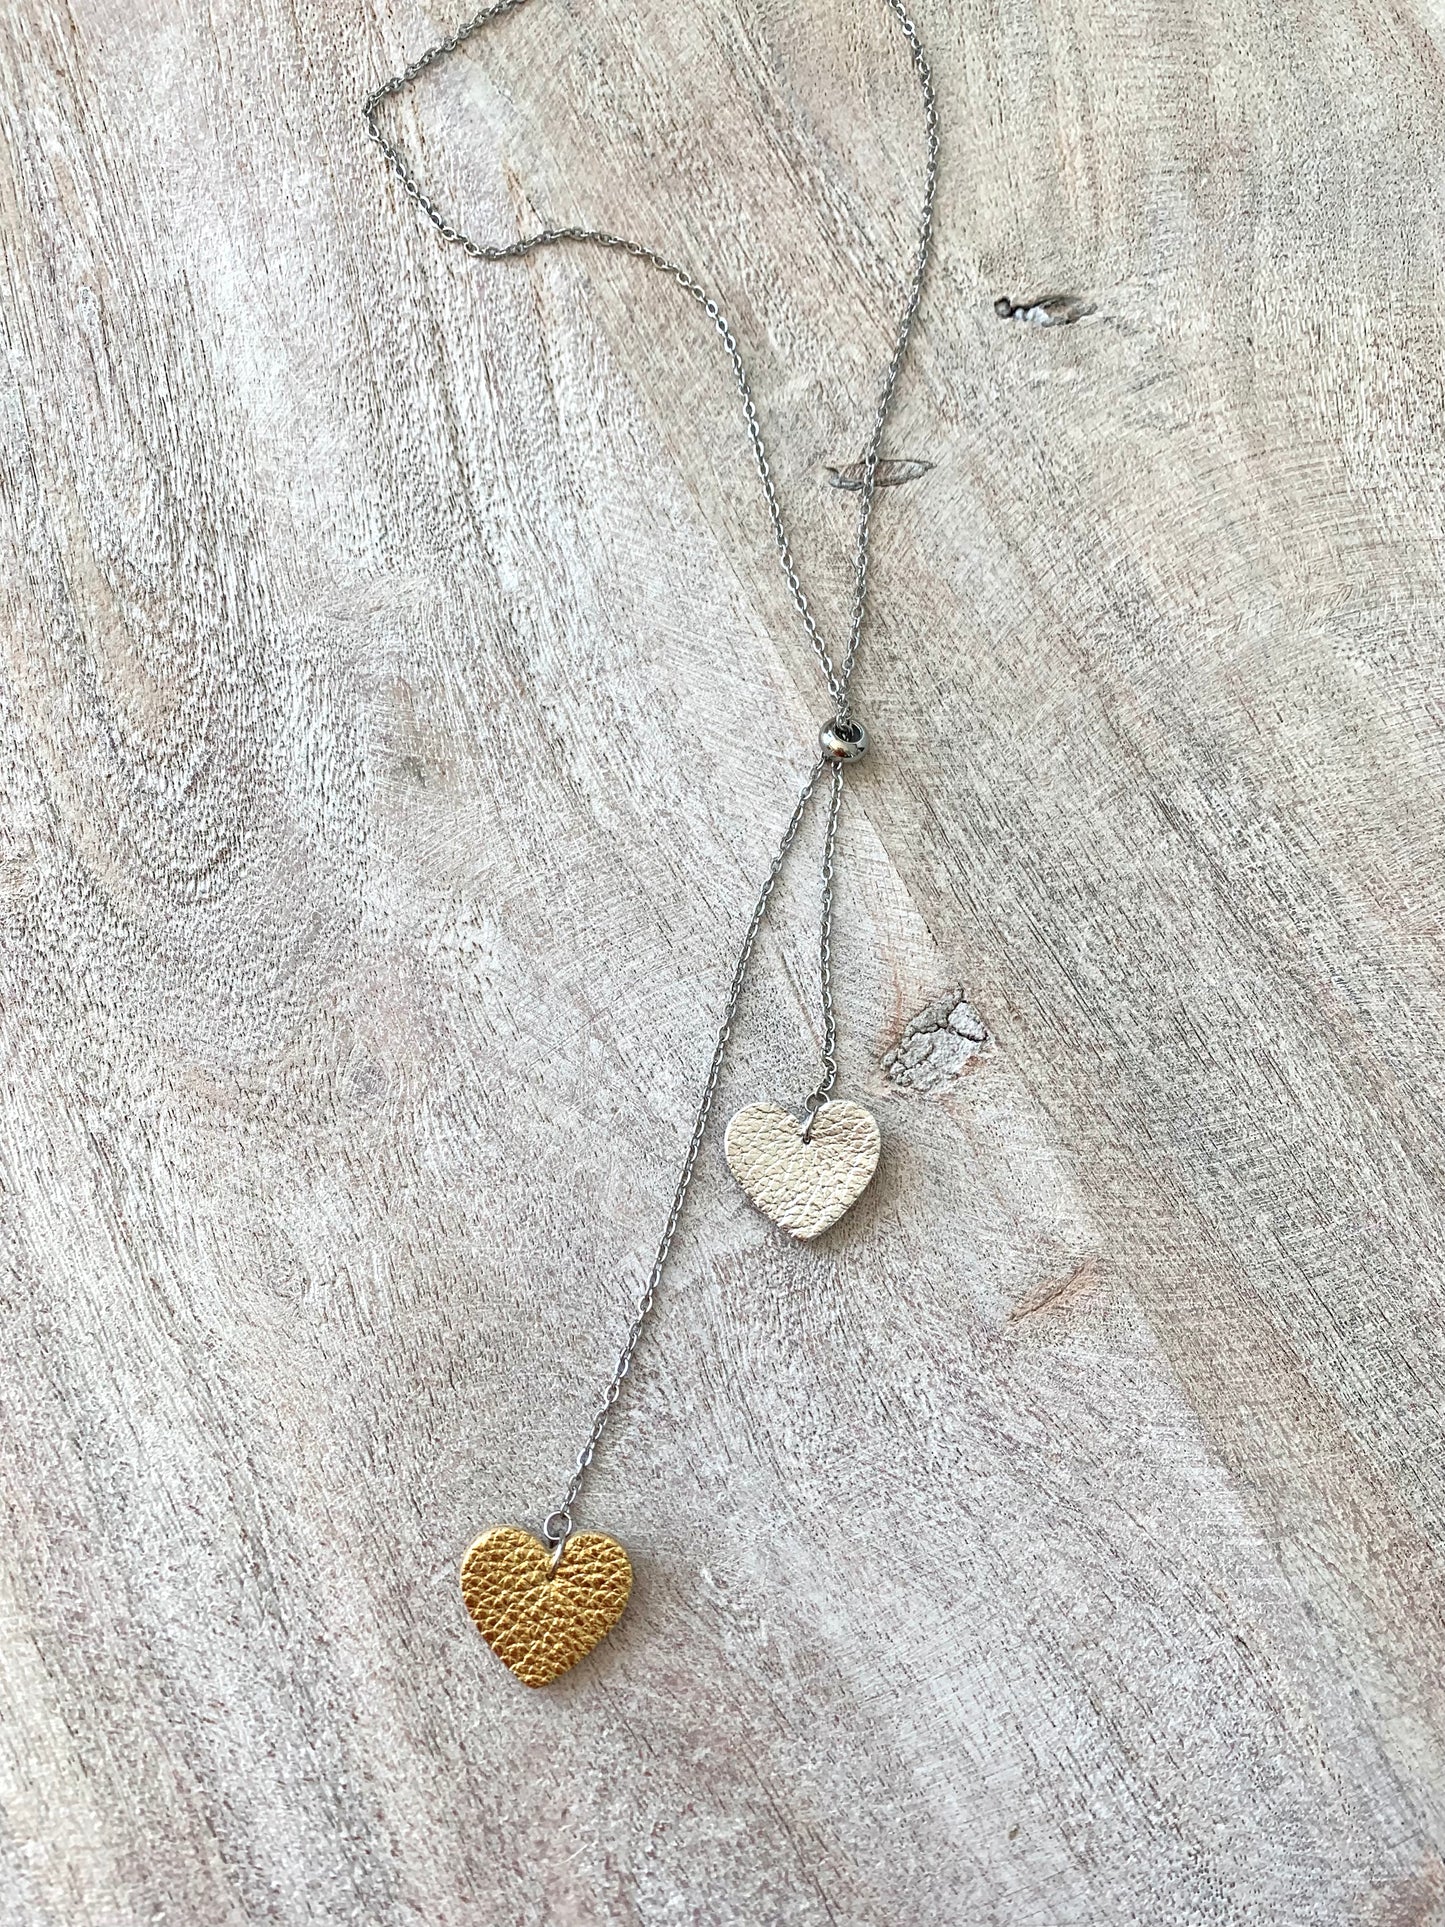 LEATHER HEARTS NECKLACE